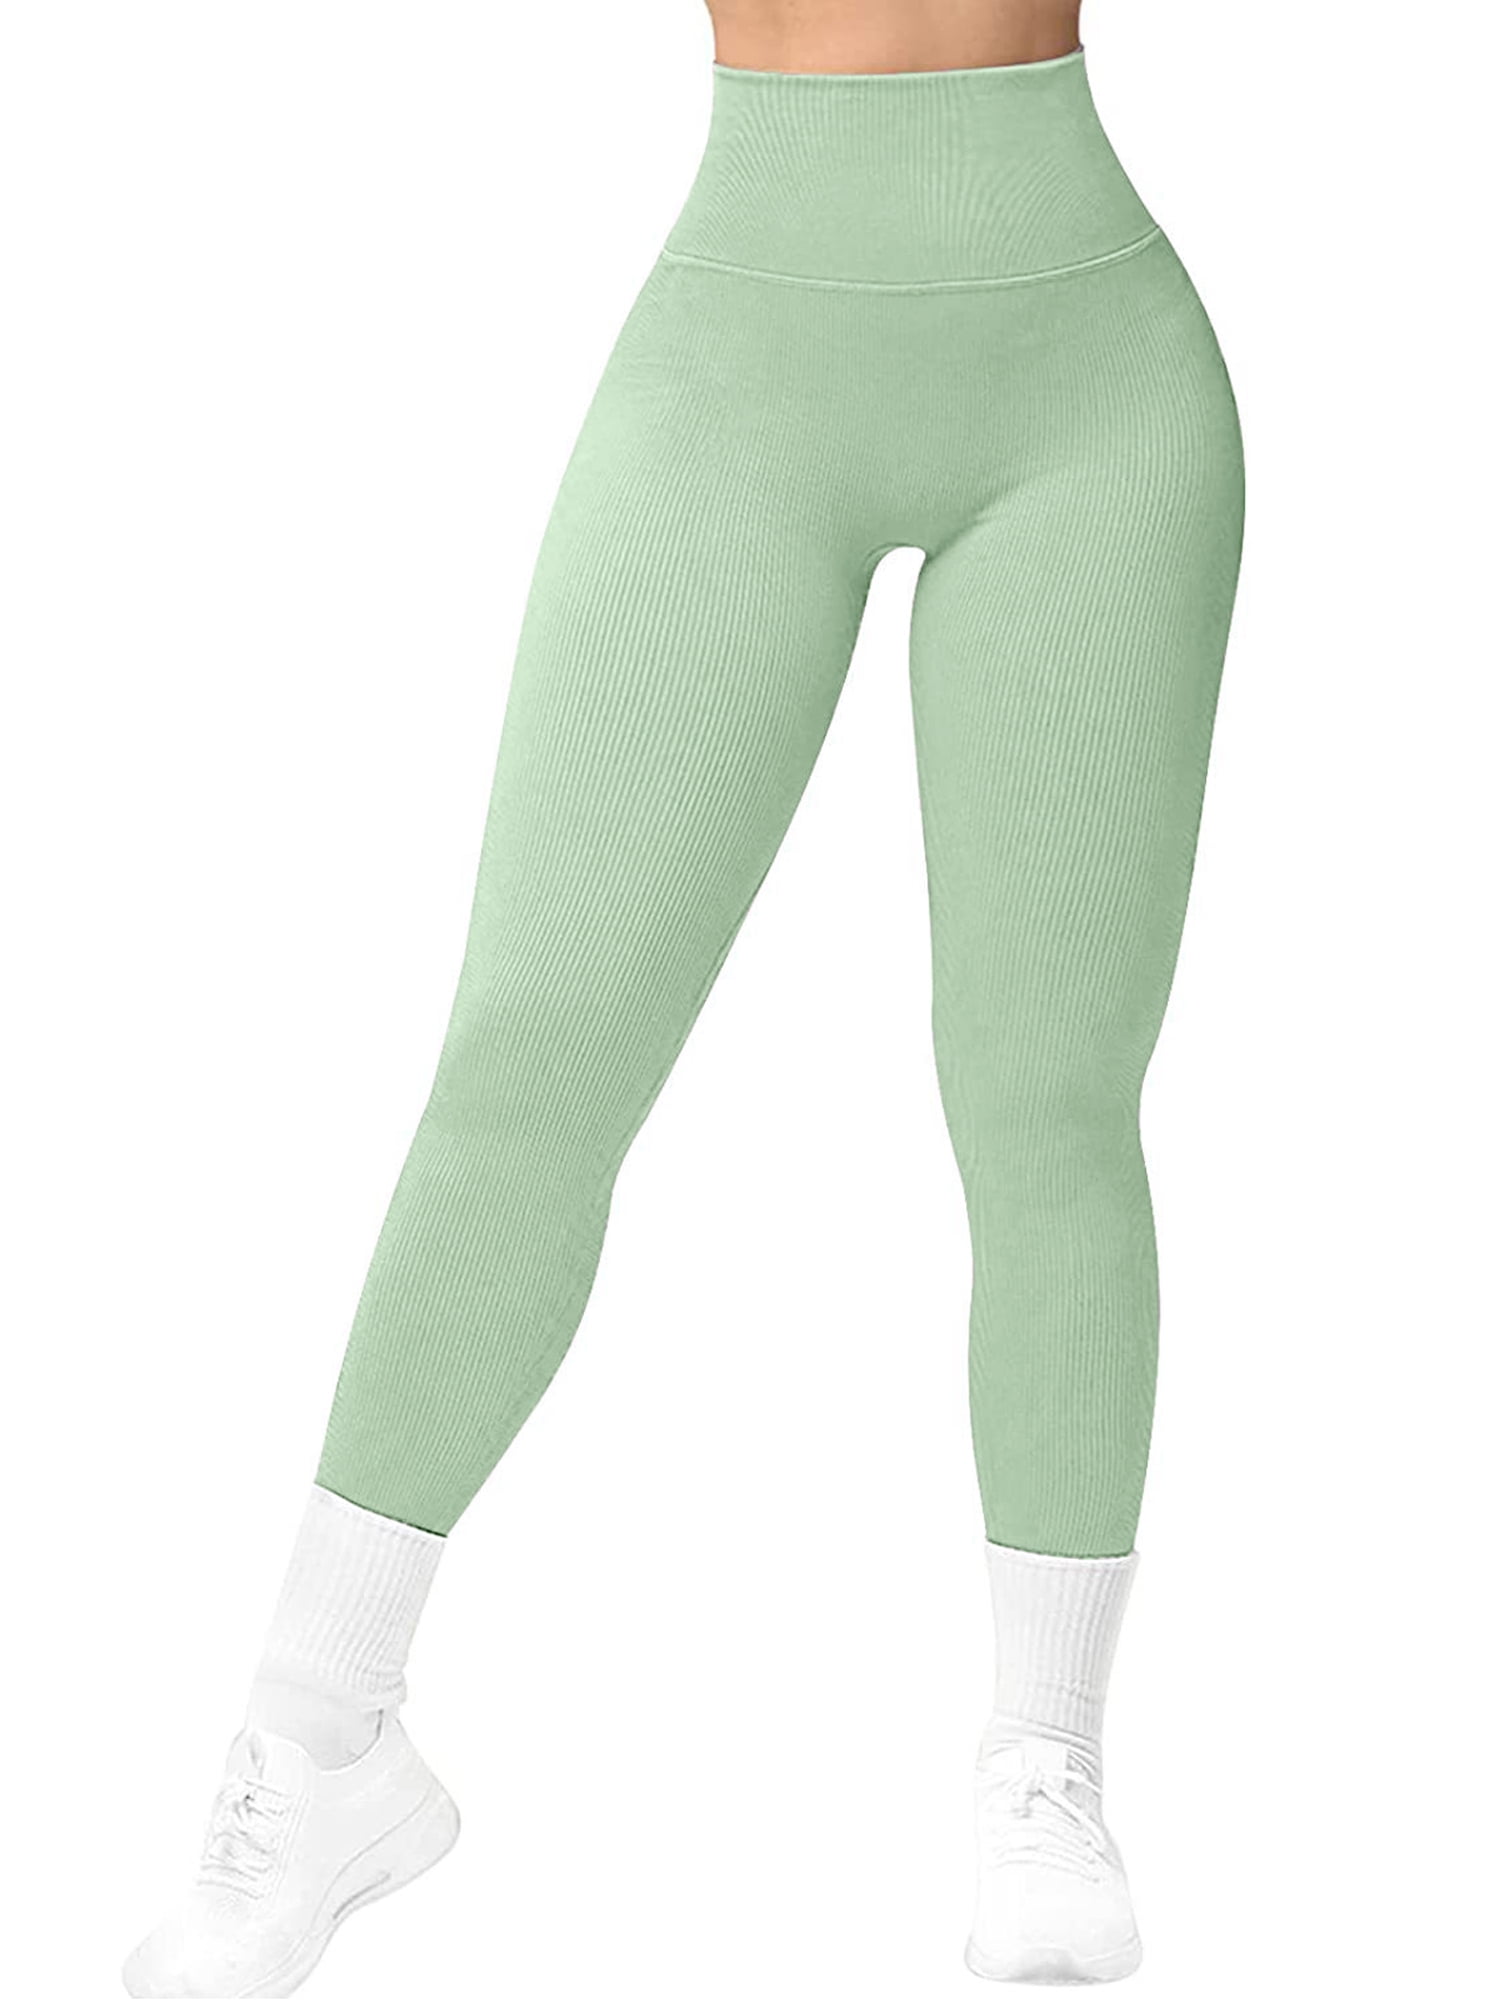 Women's Solid Color Sports Leggings Non See Through High Waisted Tummy  Control Tights Yoga Pants 